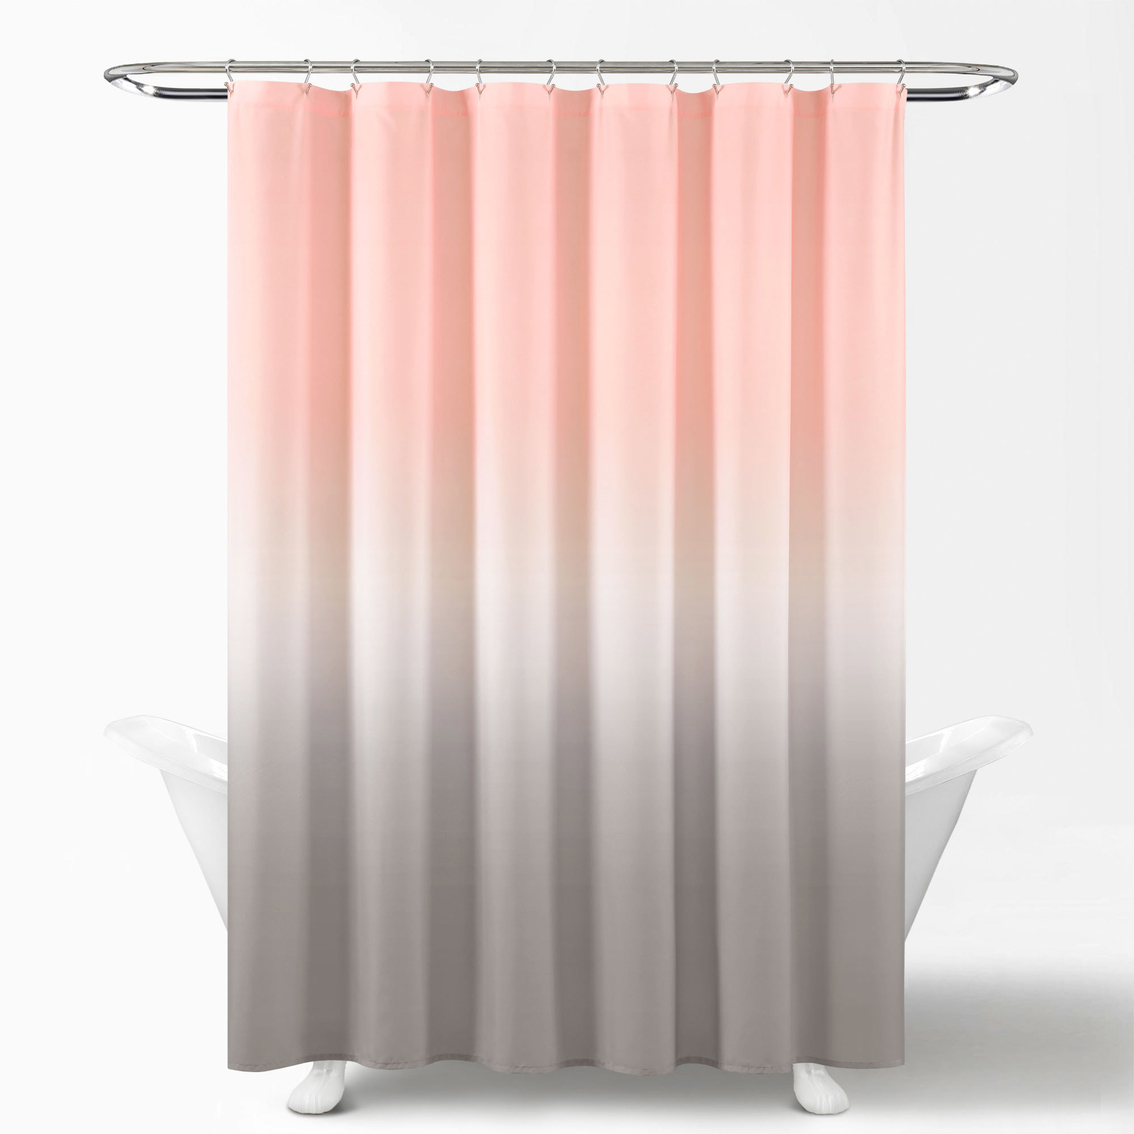 Lush Decor Ombre Fiesta Shower Curtain 72 x 72 - Image 6 of 8